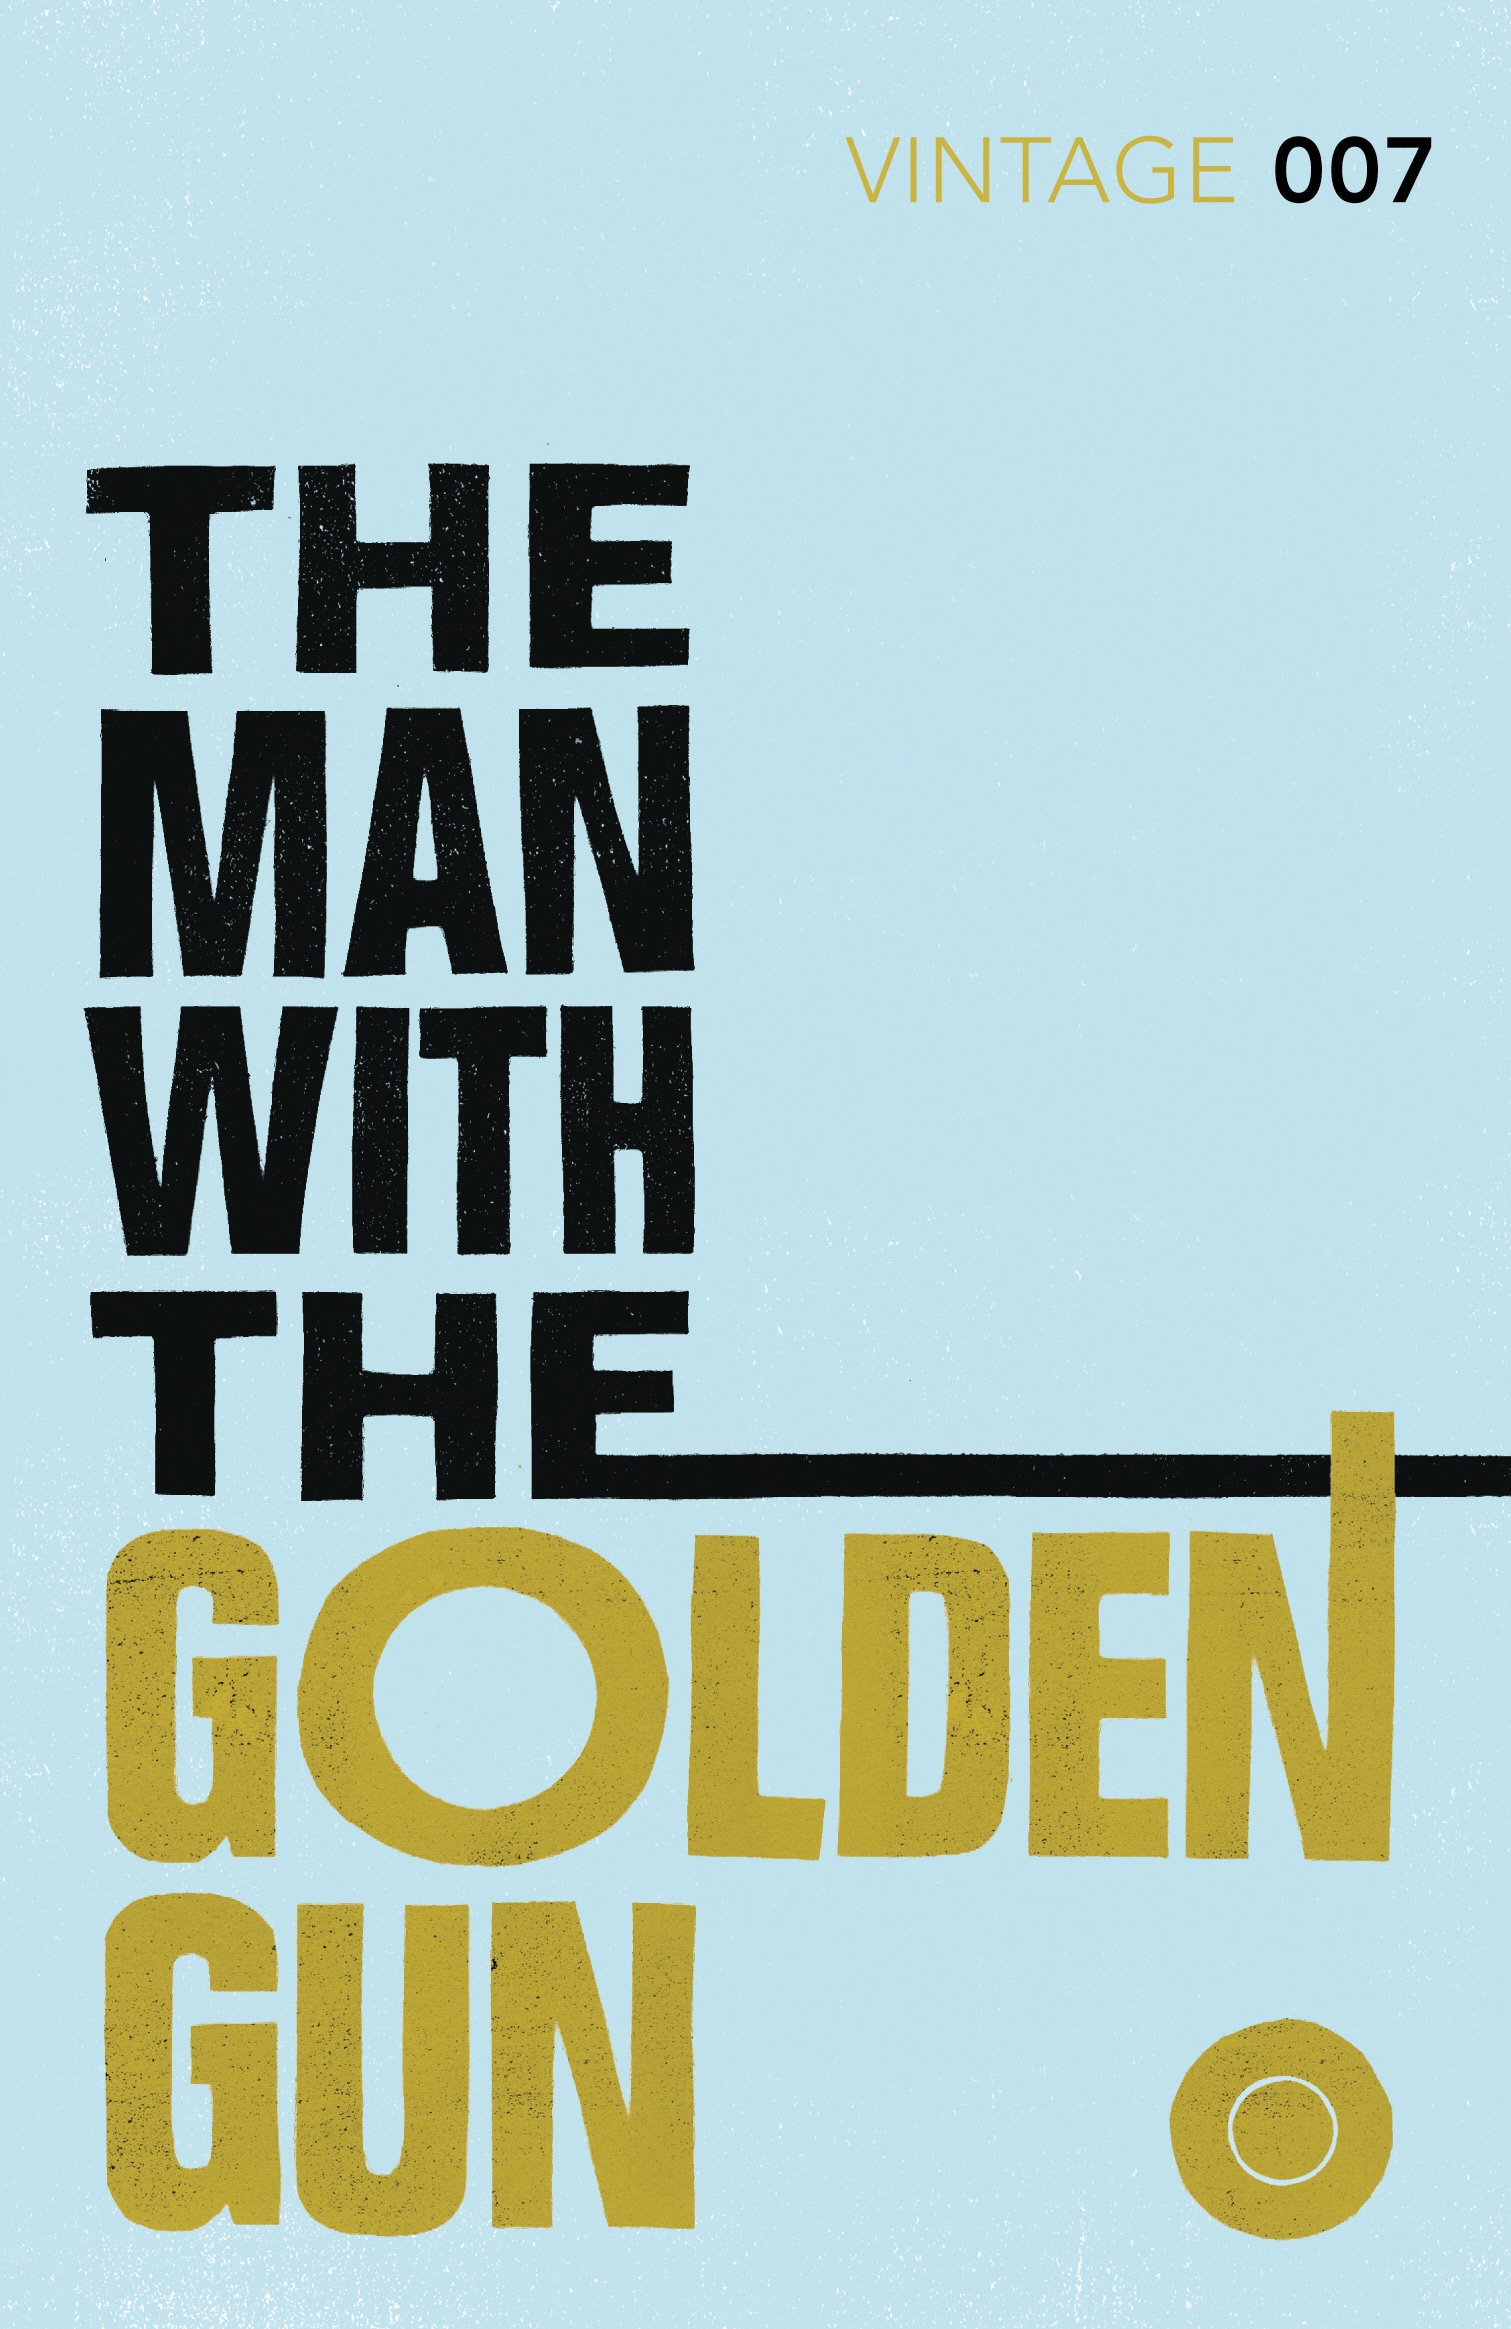 Book “The Man with the Golden Gun” by Ian Fleming — September 6, 2012